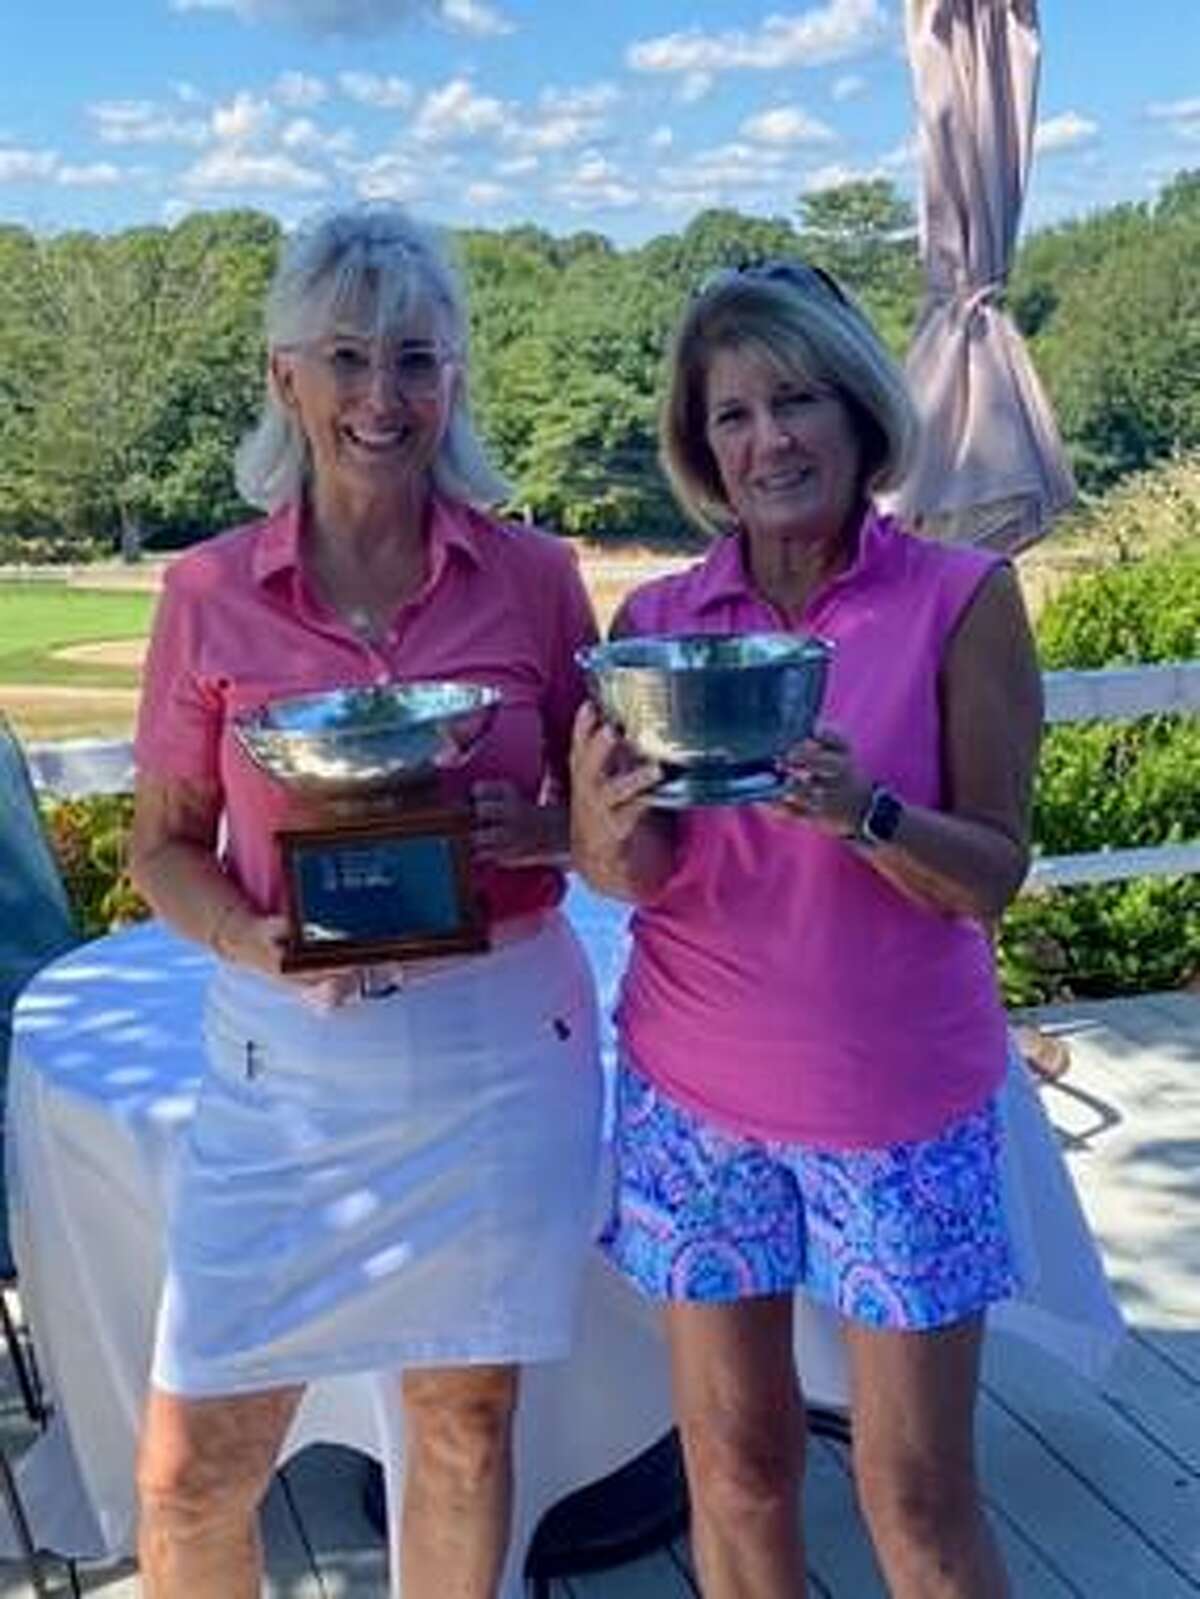 The Old Lyme Country Club WGA held the 18-hole and 9-hole Club Championship finals Aug. 18. Hollis Barry of Essex was matched against Michelle Abraham of Old Lyme in the 18-hole category. Lynn Edwards of Lyme was paired against Clinton Standart of Lyme in the 9-hole play off. In a match play format, Hollis Barry defeated Michelle Abraham on the 18th hole and Lynn Edwards took the win on the 9th hole.